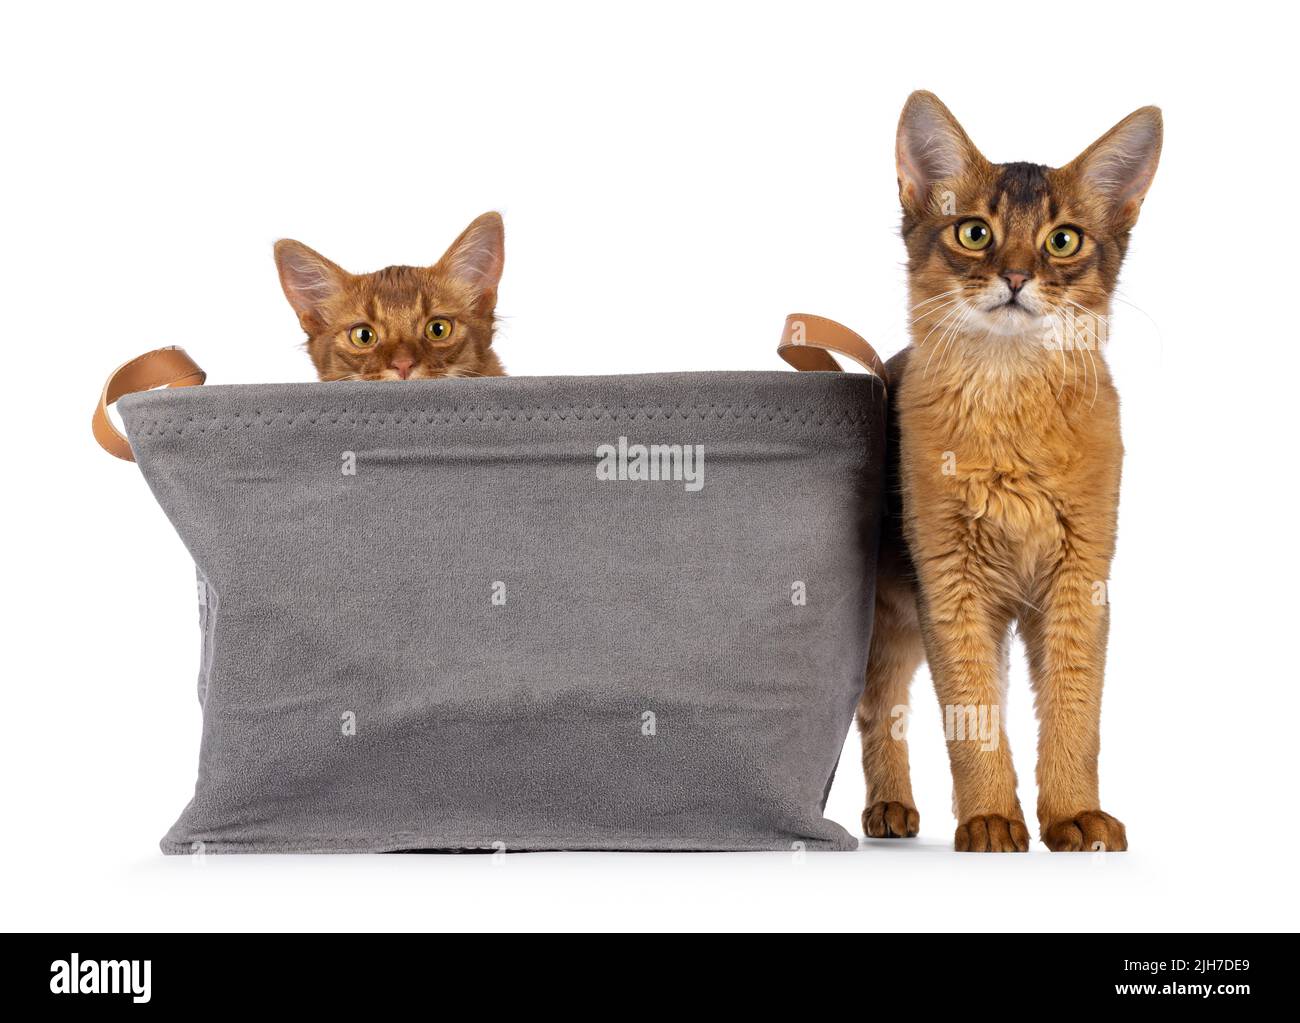 Ruddy and sorrel Somali cat kittens, sitting in and standing beside grey basket. Looking towards camera. Isolated on a white background. Stock Photo